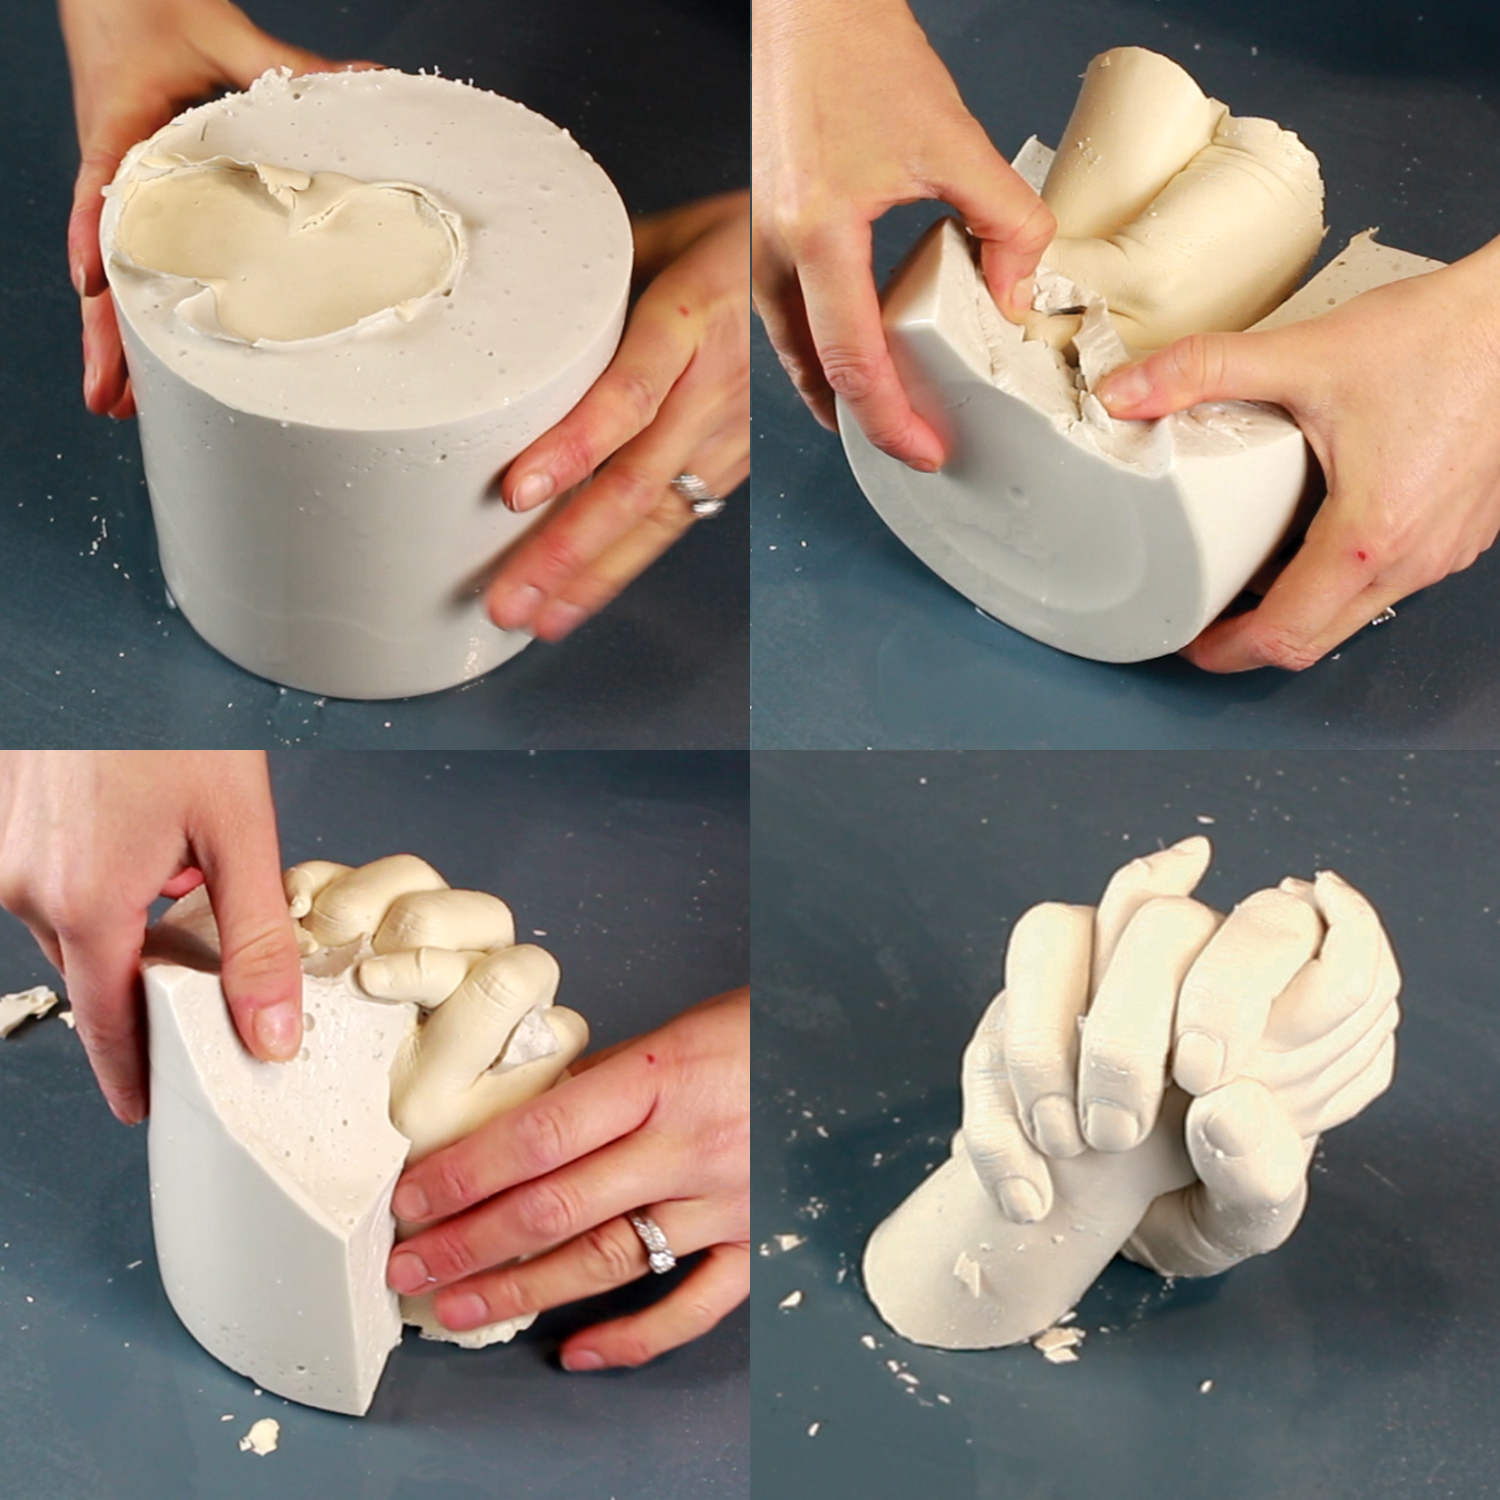 Holding Hands Couples 3D Casting Kit (ideal for 2/3 hands